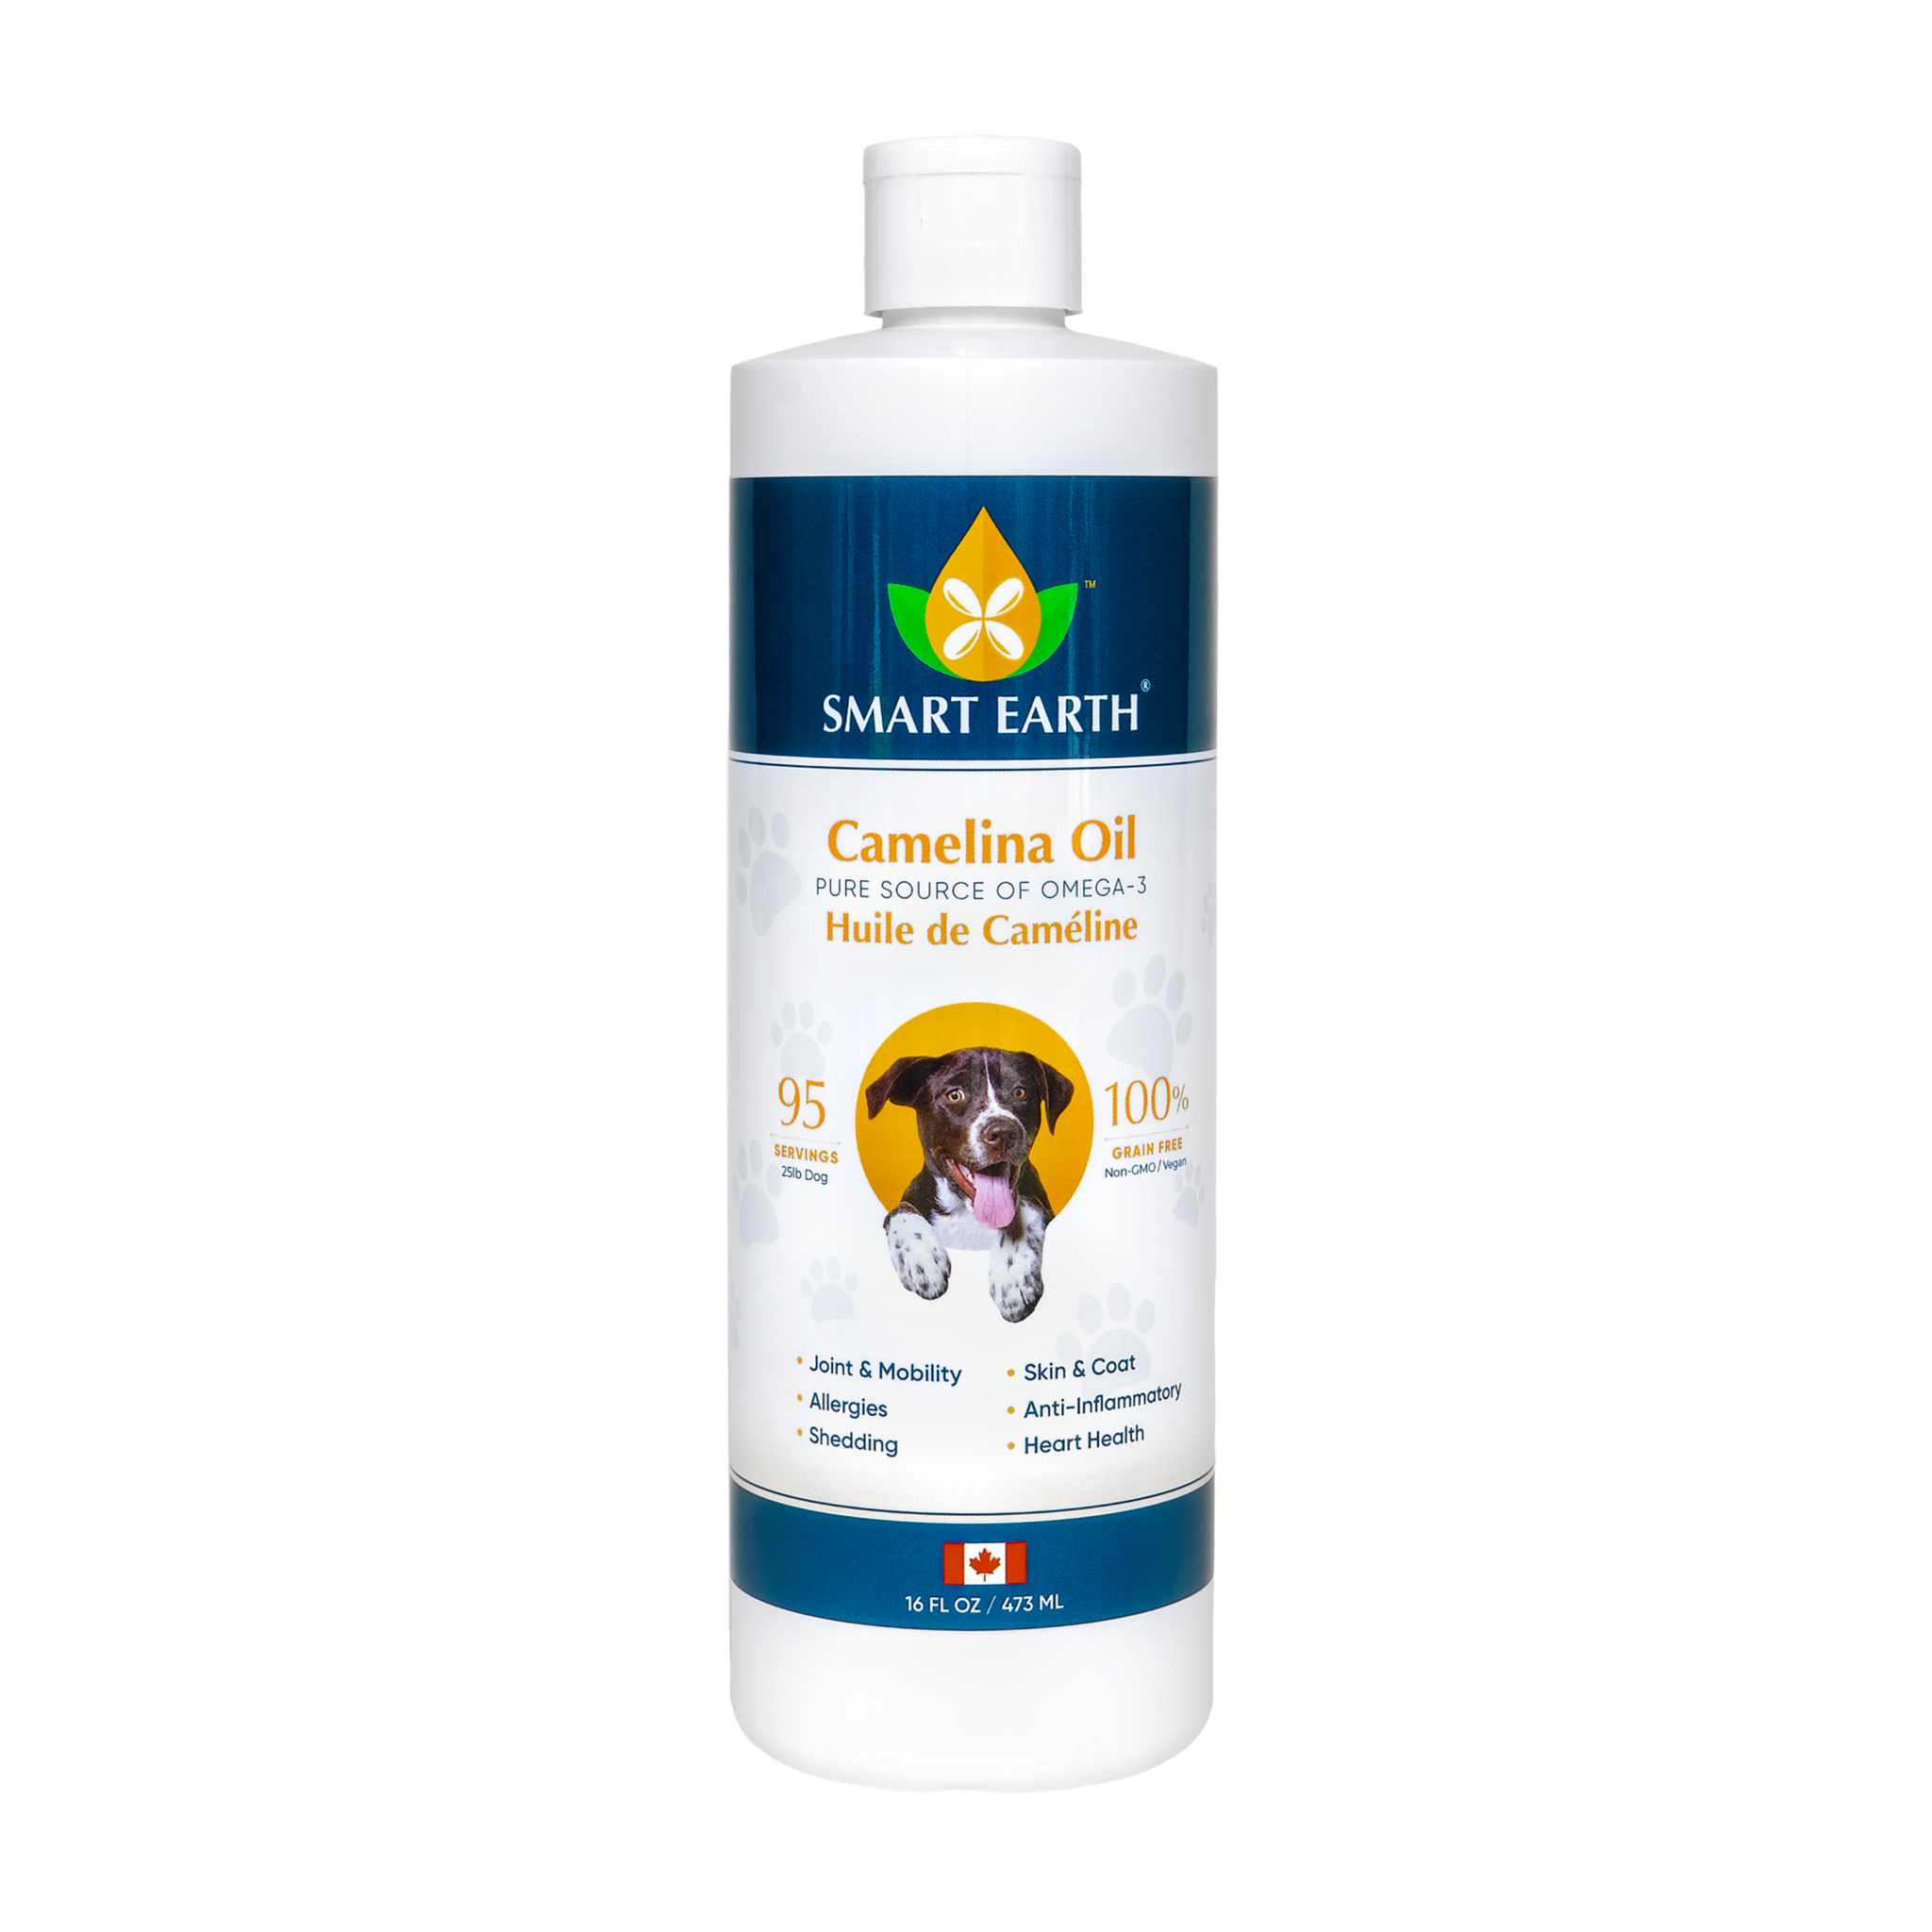 Smart Earth - Camelina Oil for Dogs, 16 oz